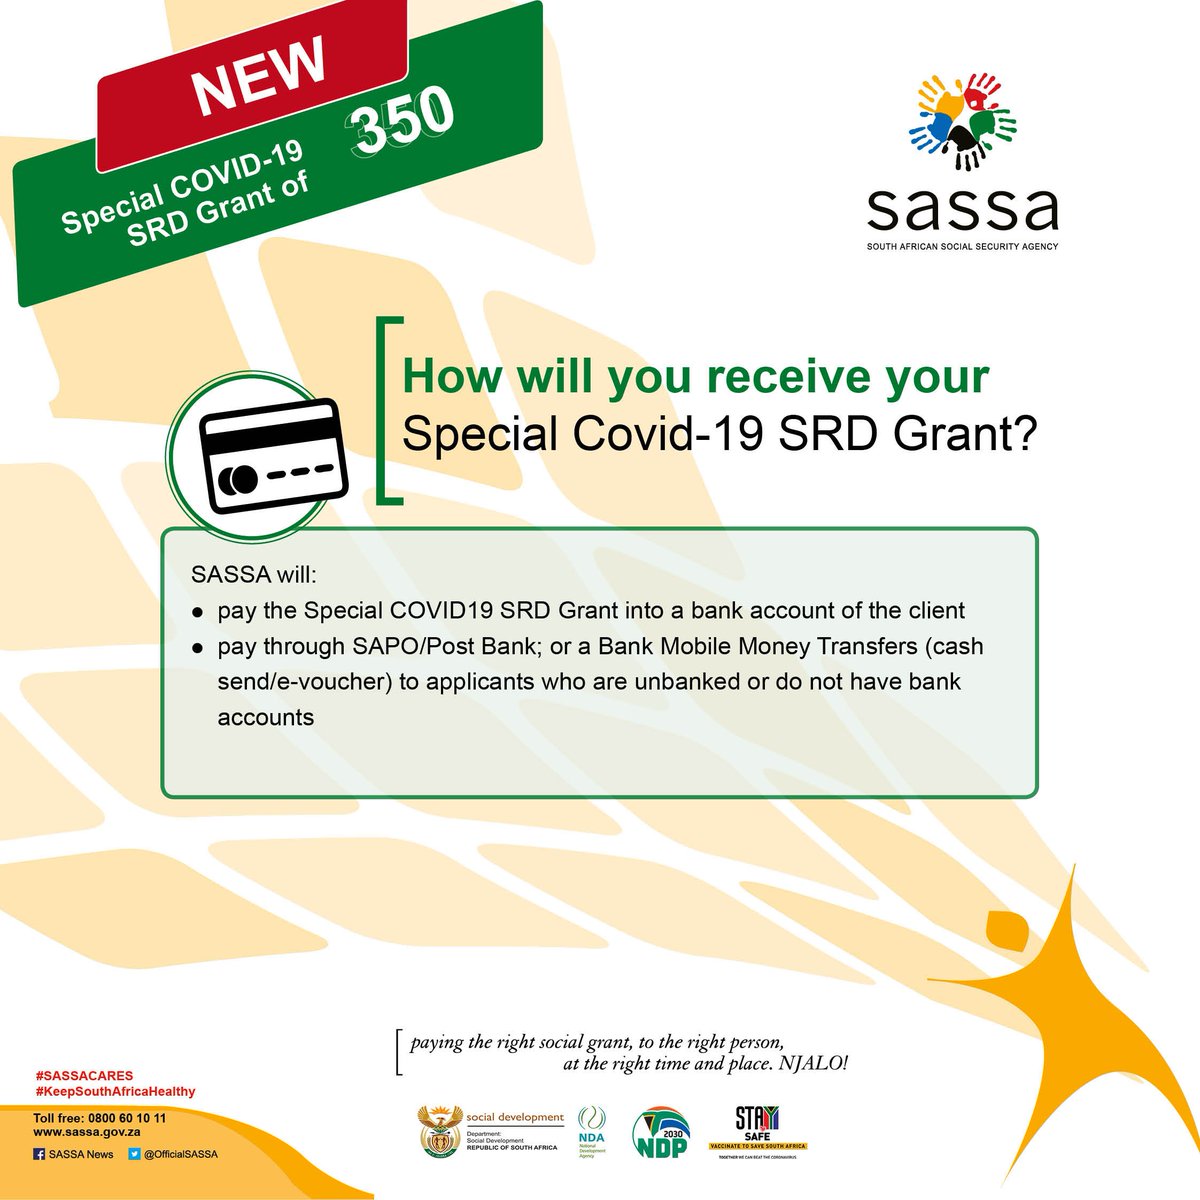 Jul 02, 2020 - the sa social security agency (sassa) is currently approving...